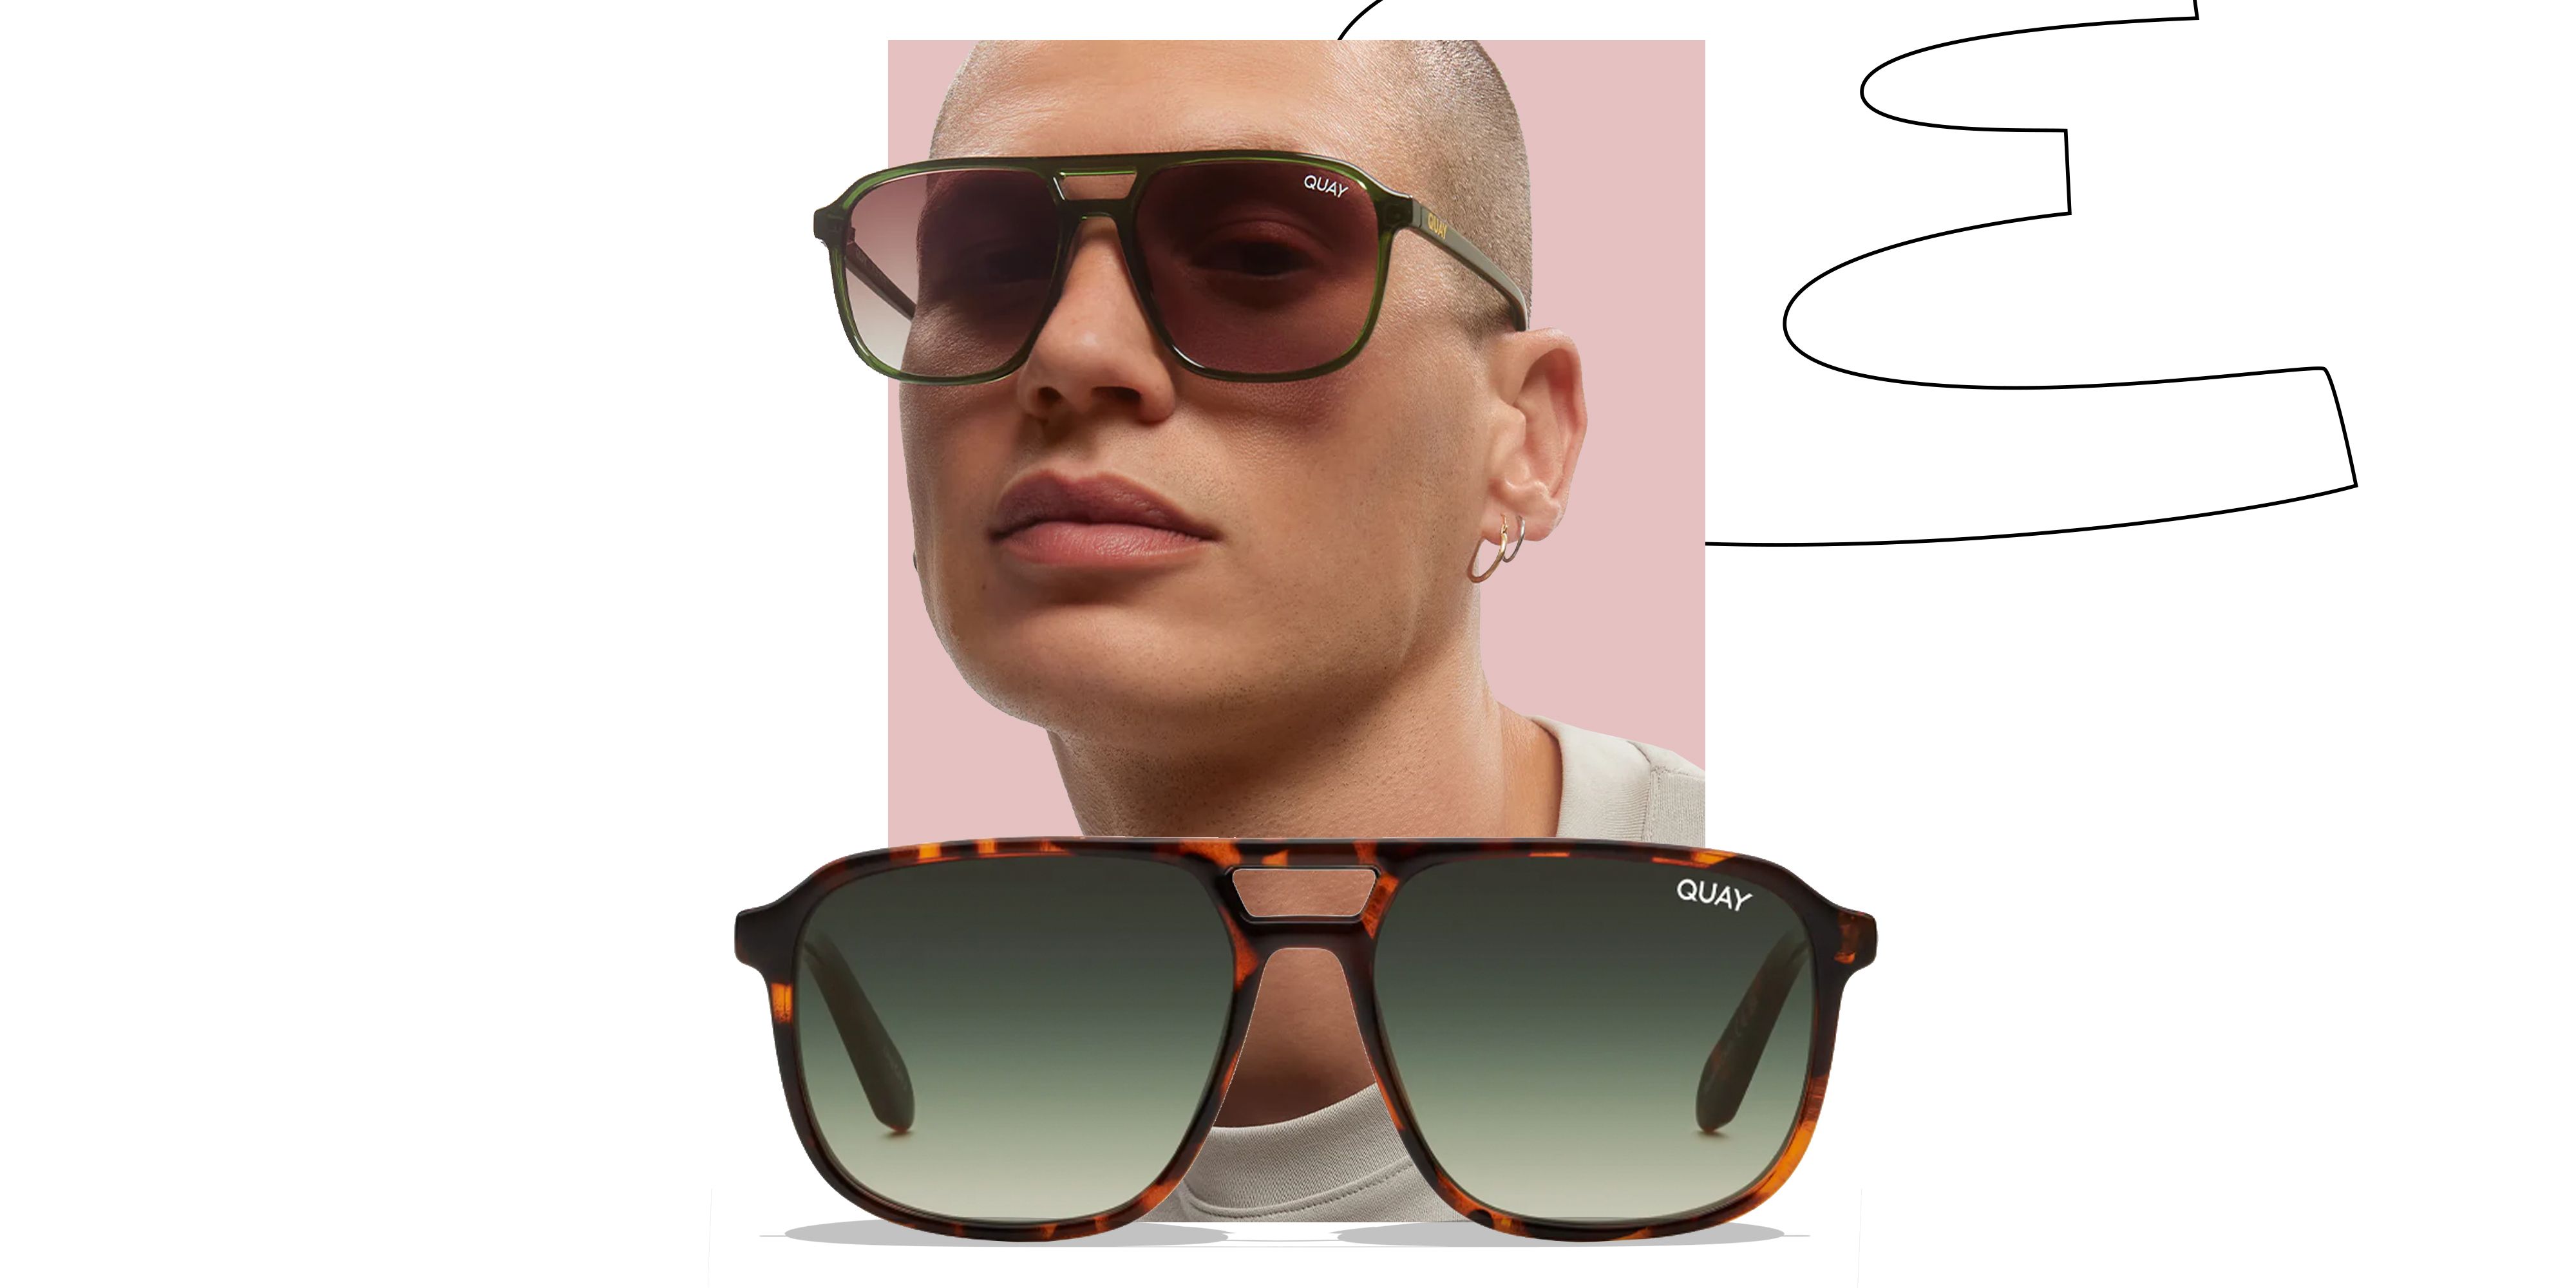 Quay sunglasses: We put the hyped-up brand to the test | The Independent